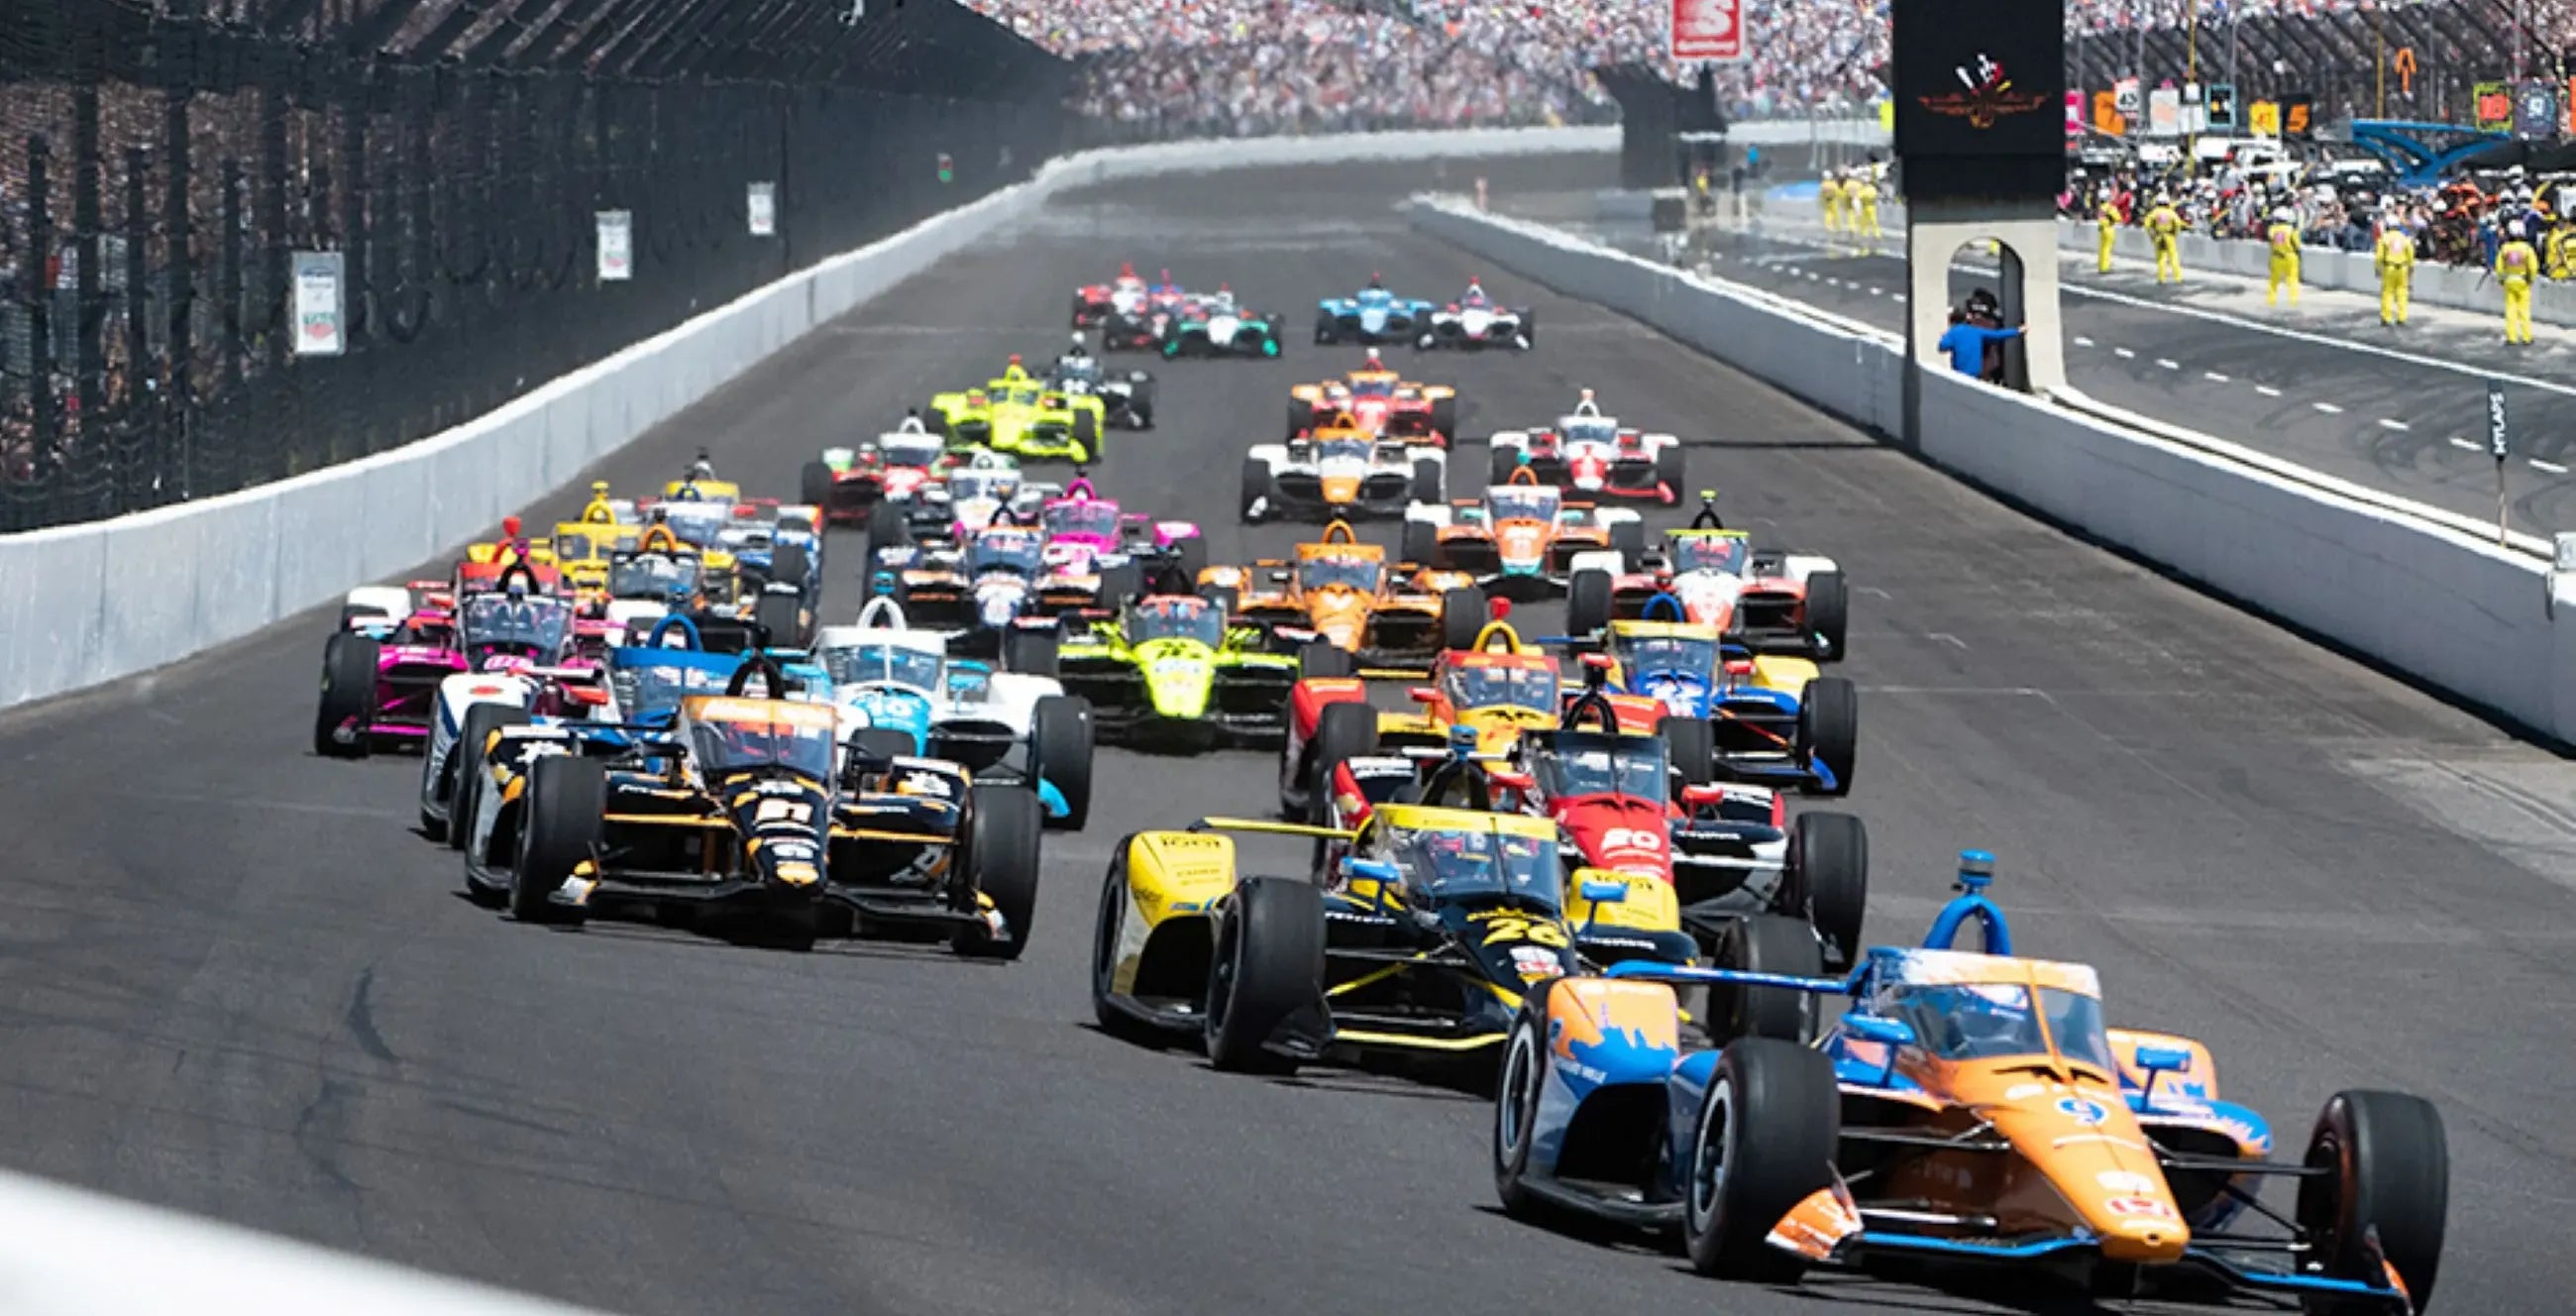 IndyCar 2022: The most exciting race category?